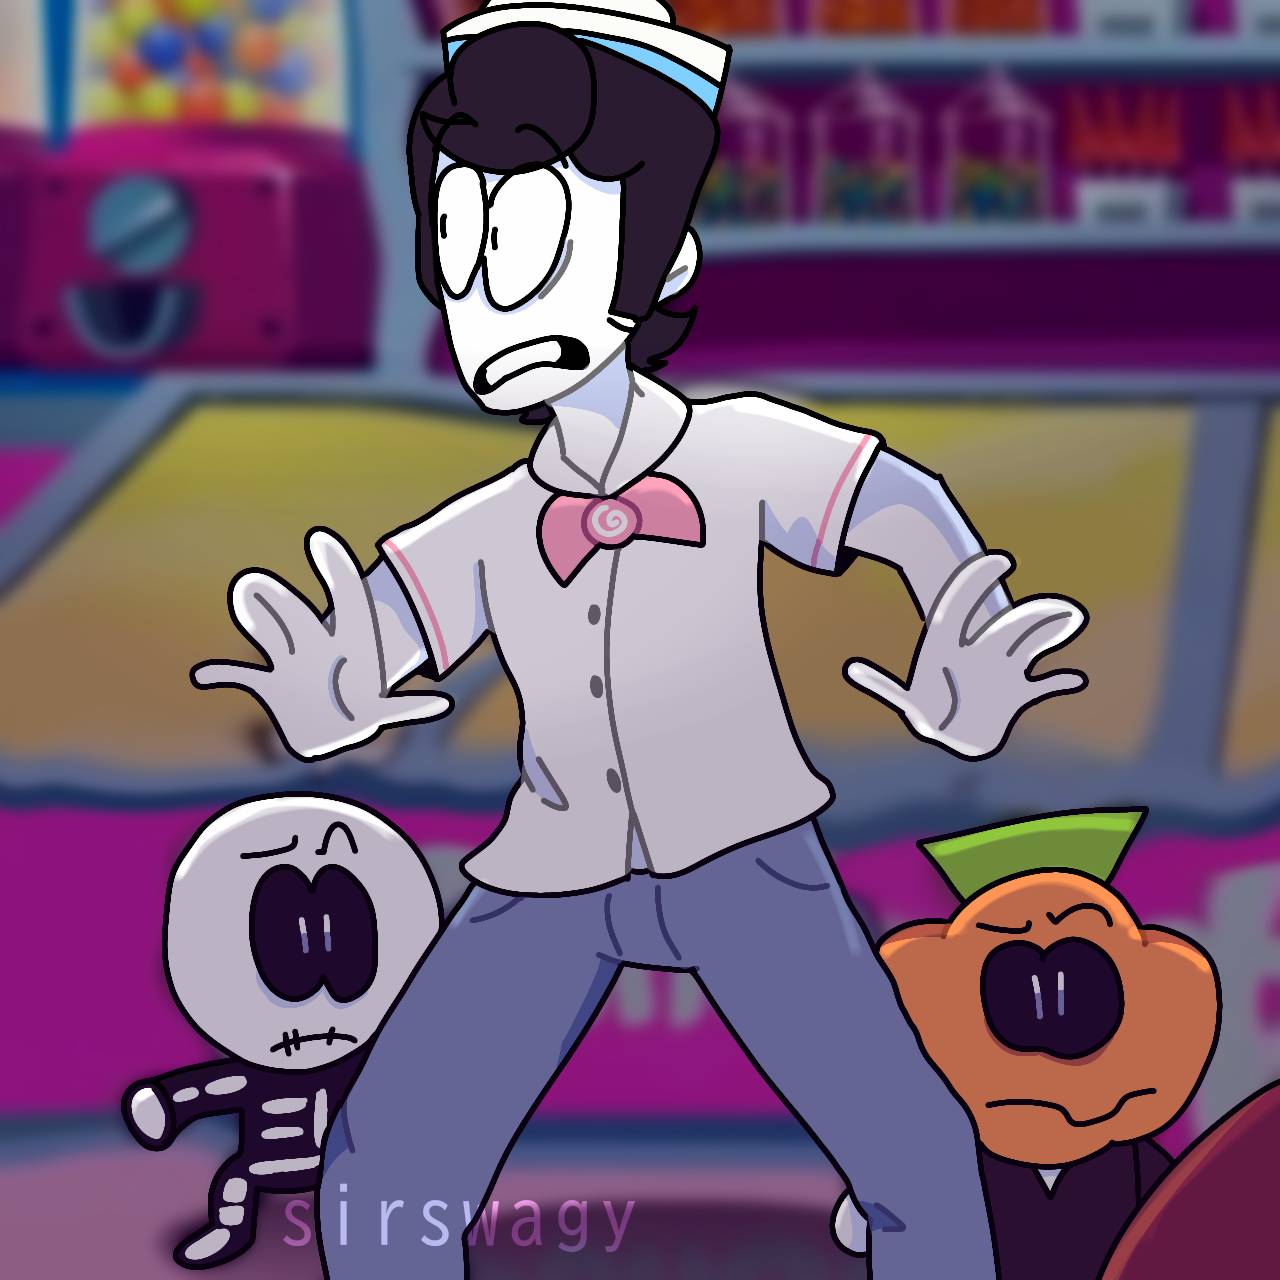 Screenshot Redraw - Spooky Month - Ross and Roy by Nn4Nn4Stuff on